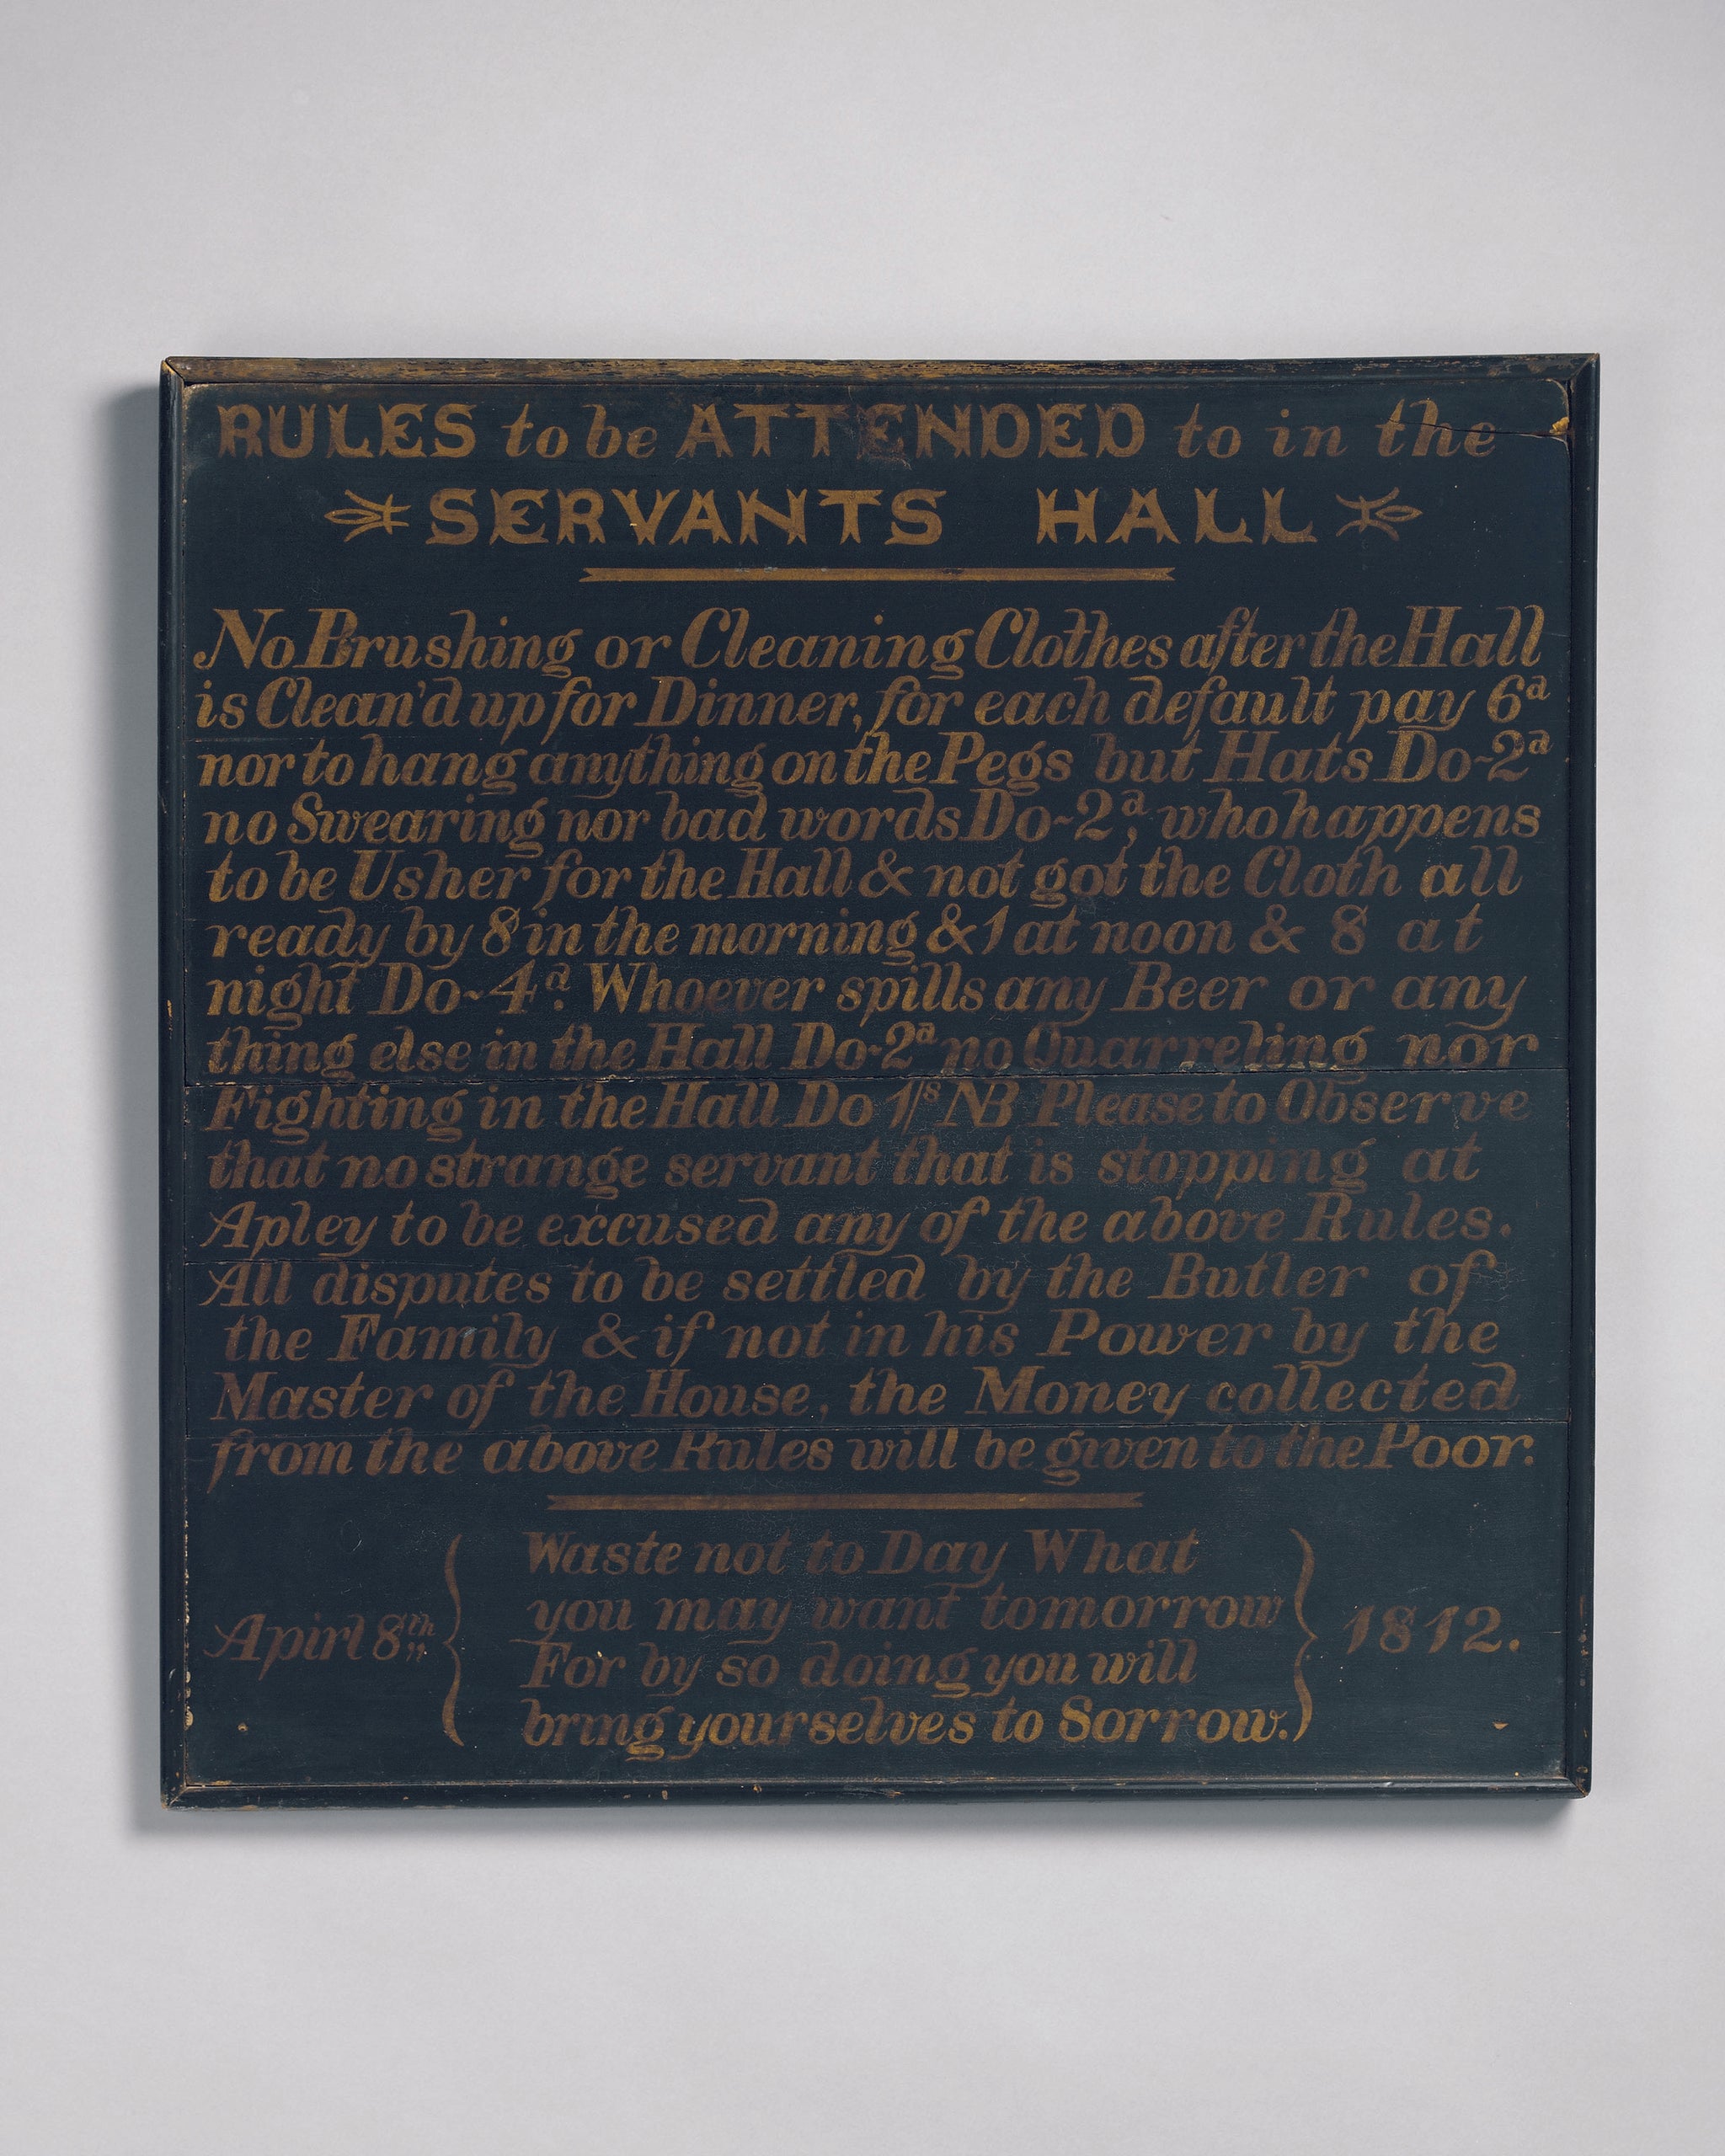 "Rules To Be Attended To In The Servants' Hall"